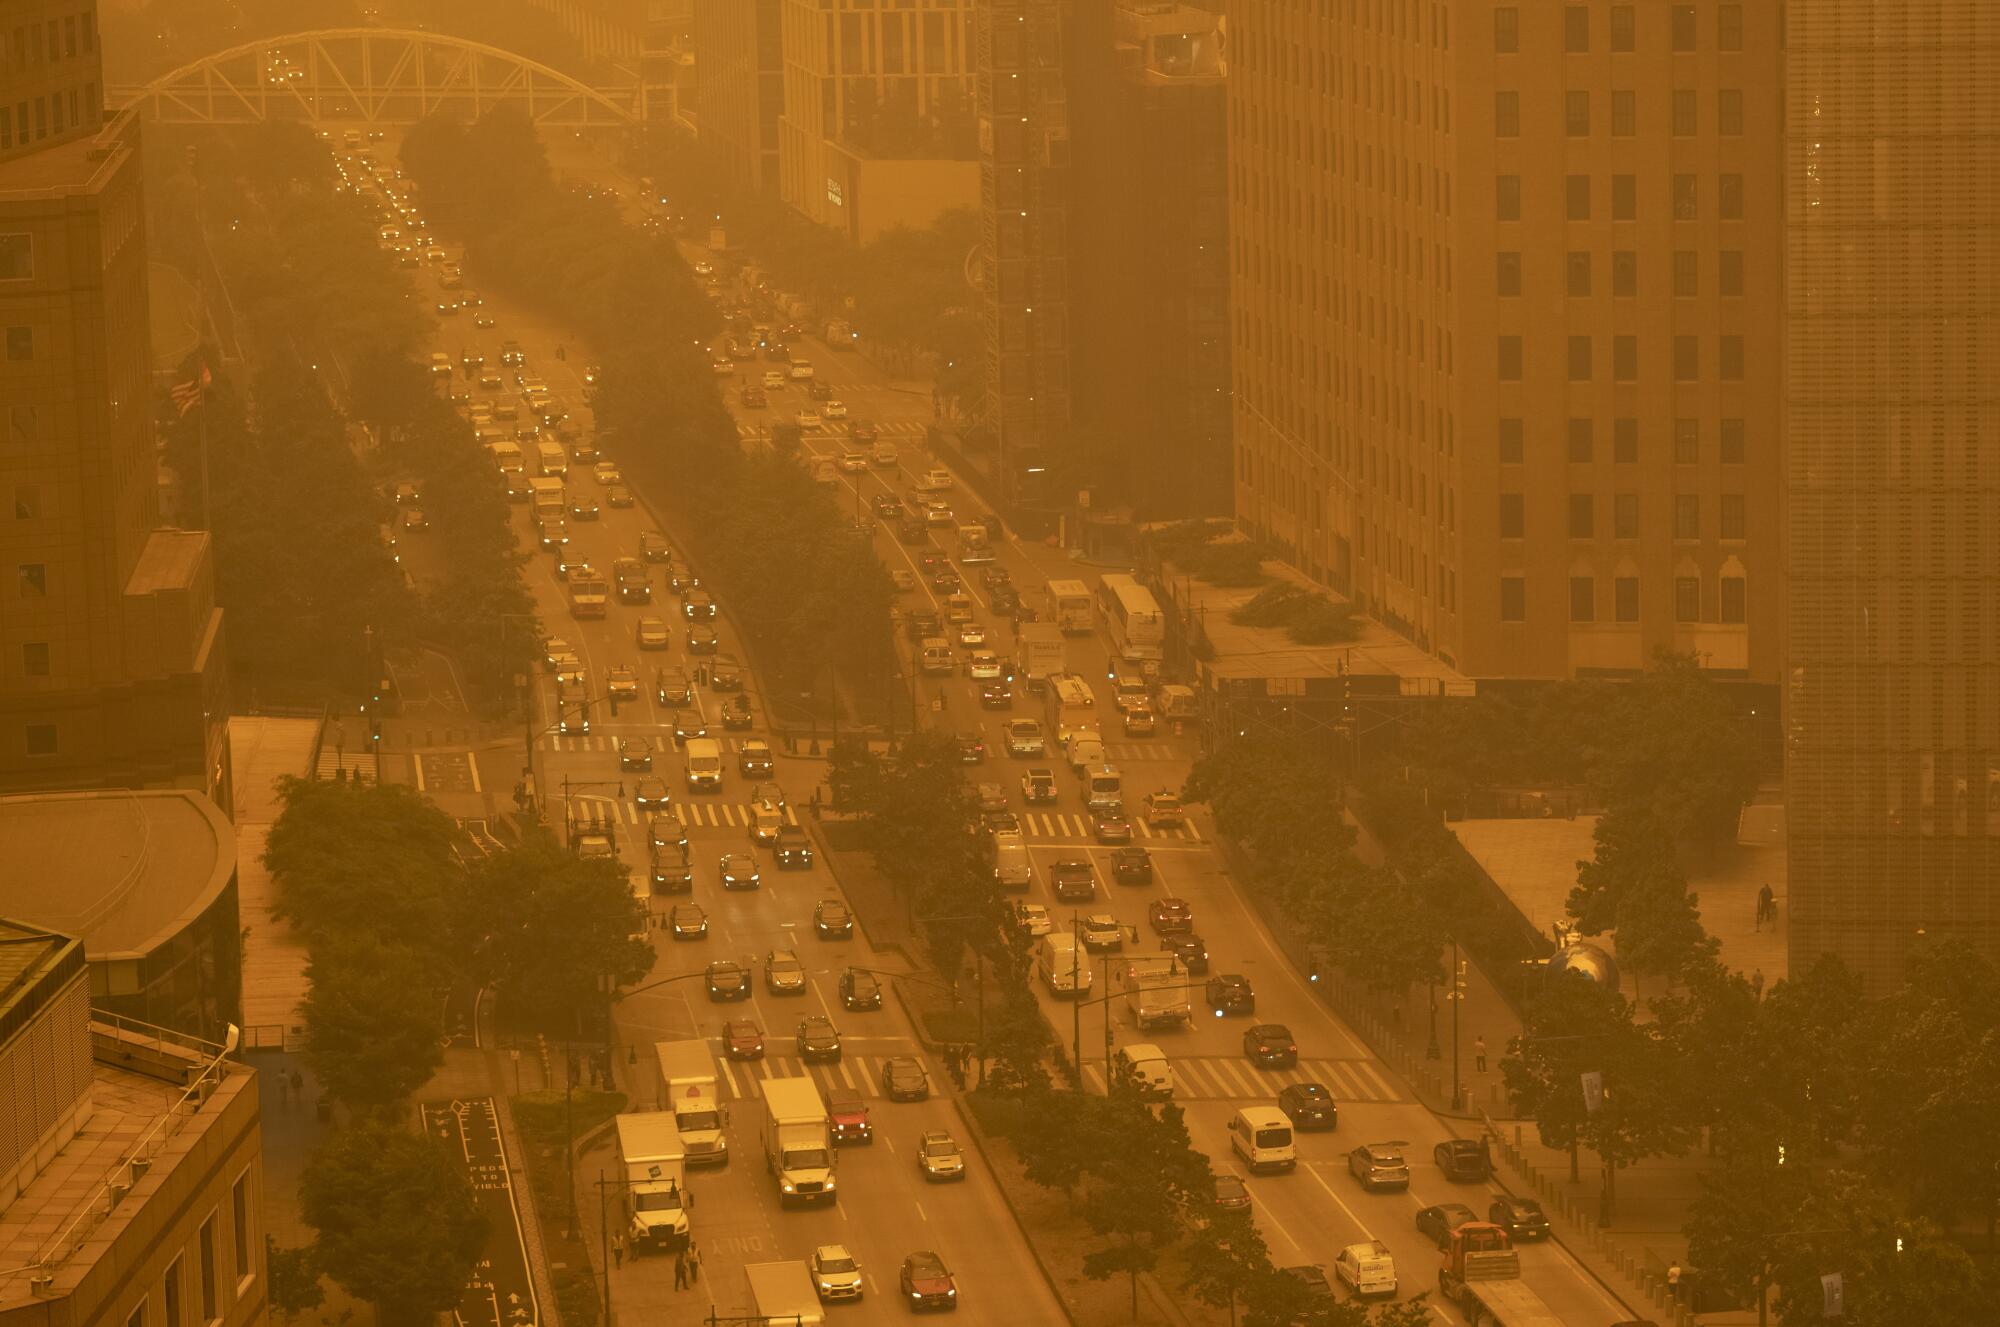 Traffic moves along in New York amid a smoky haze from wildfires in Canada.